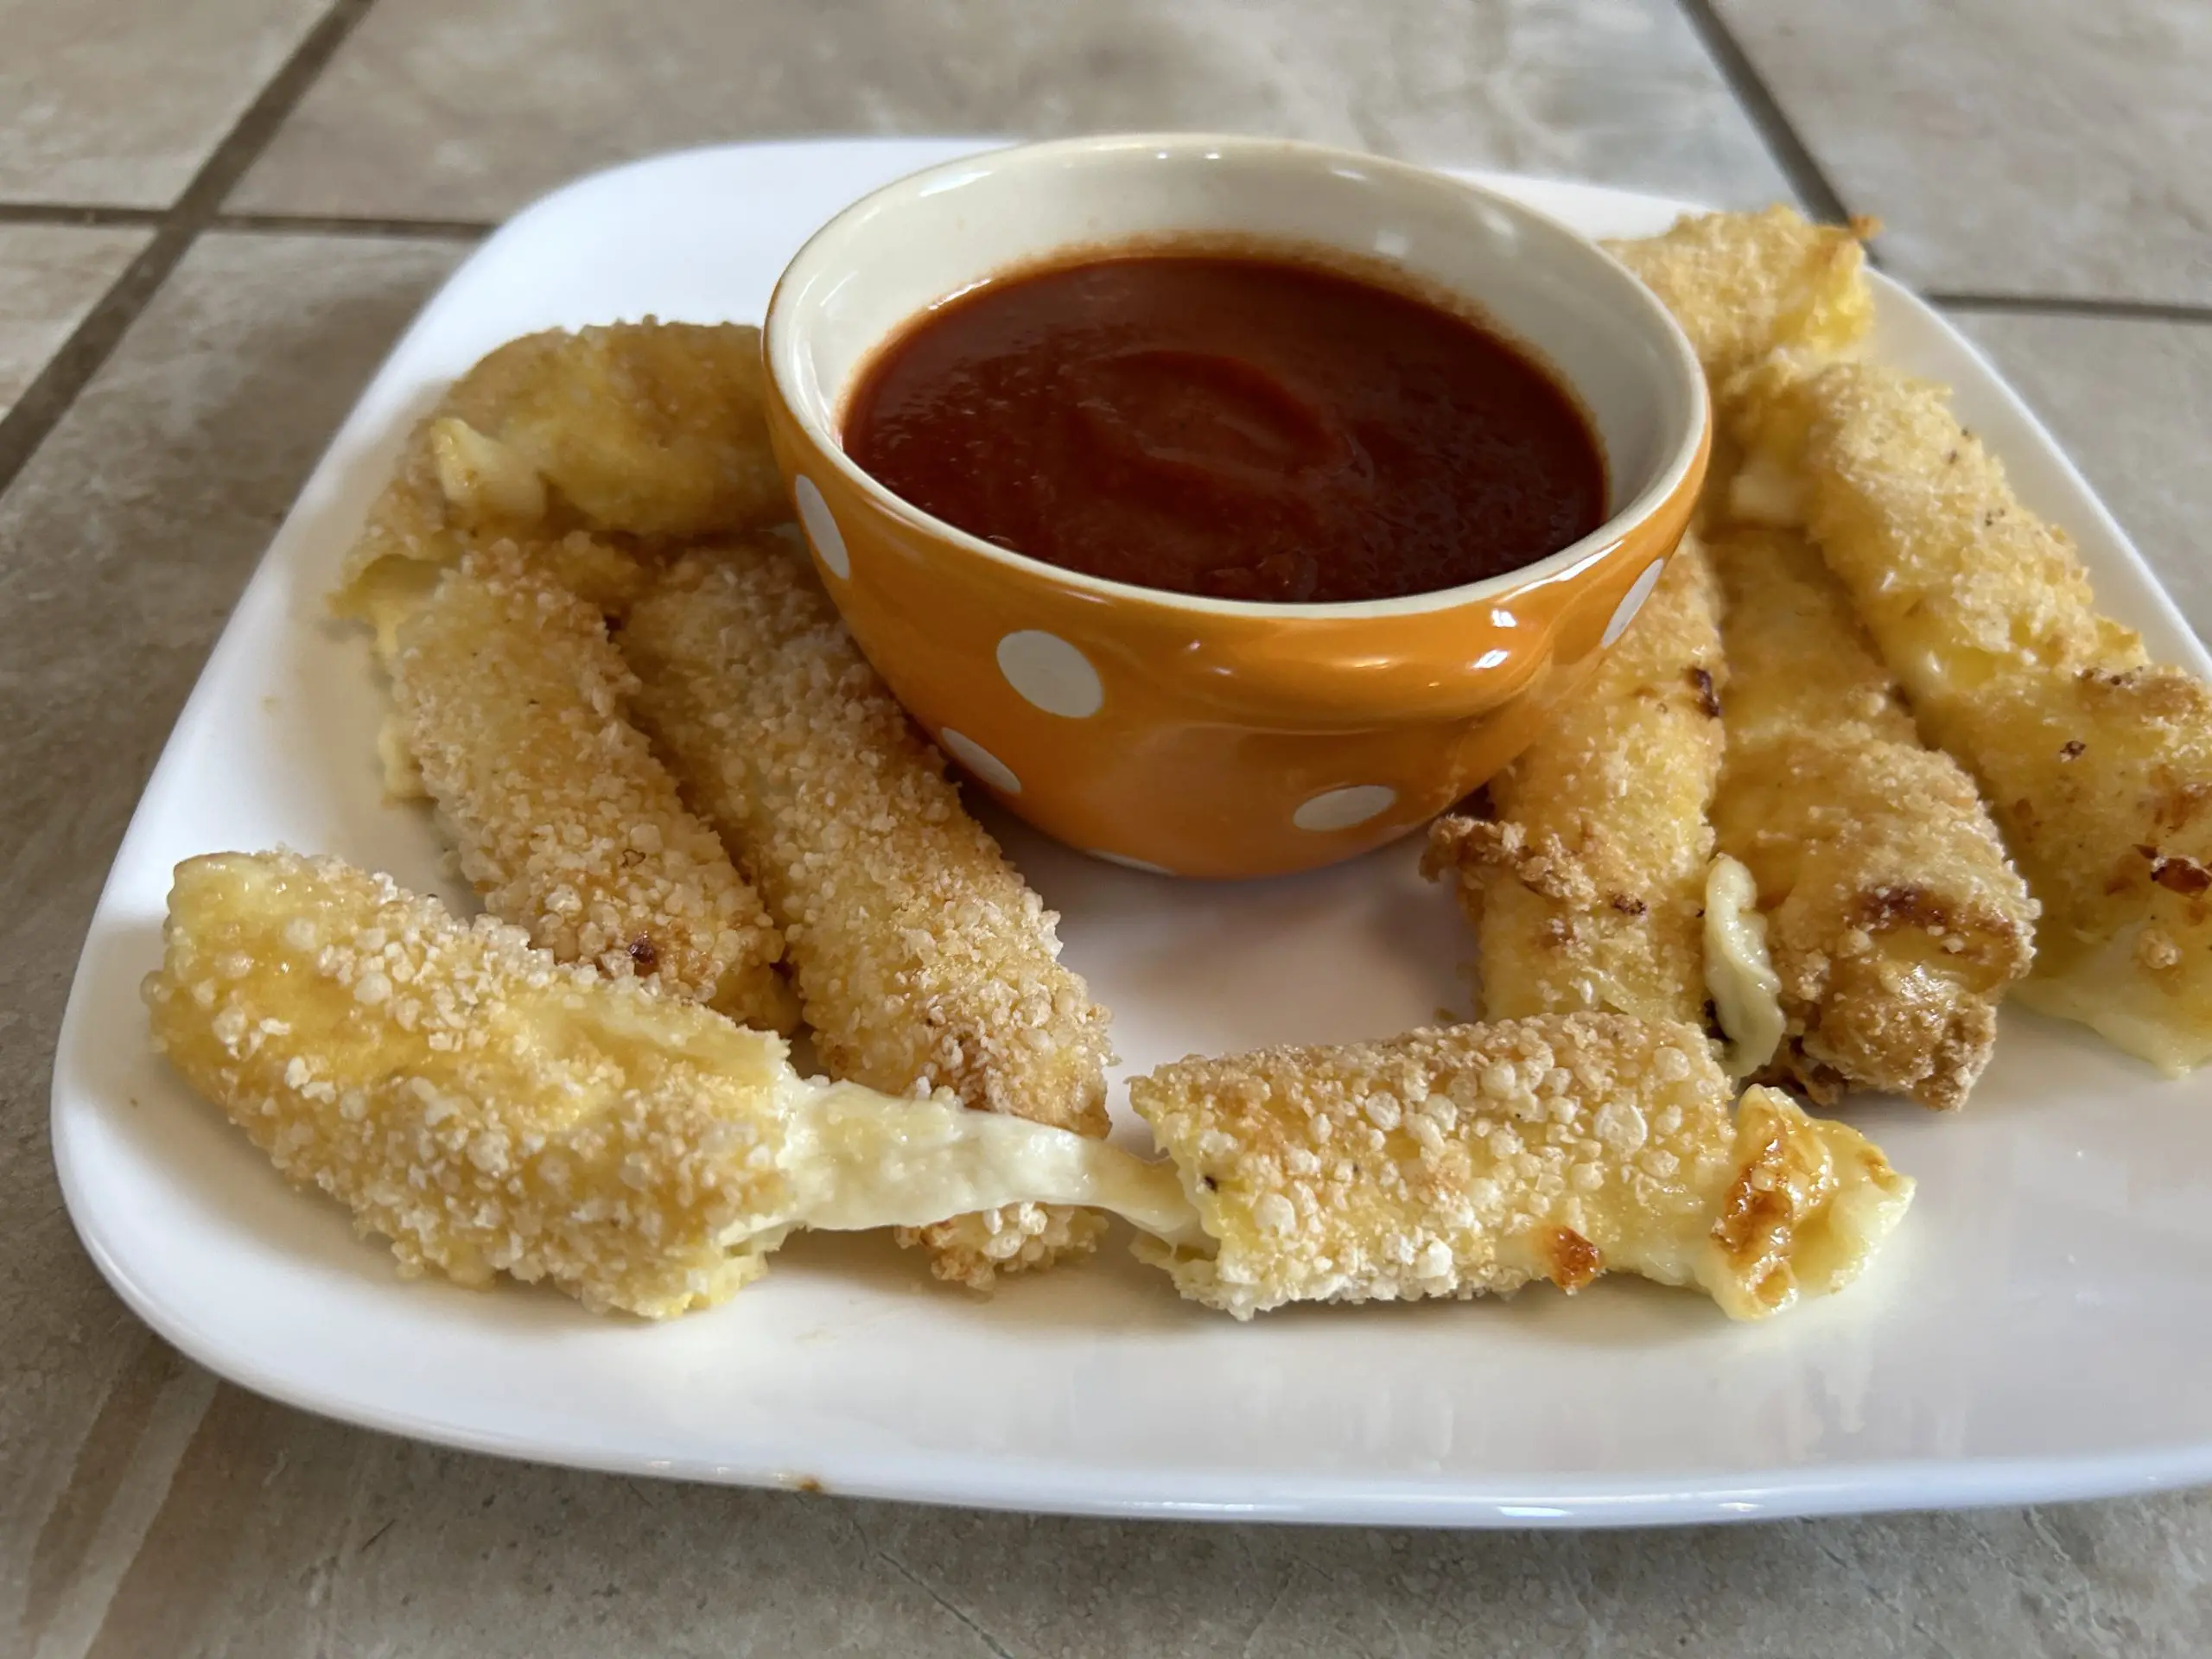 Plate of gluten free mozarella sticks with dipping sauce